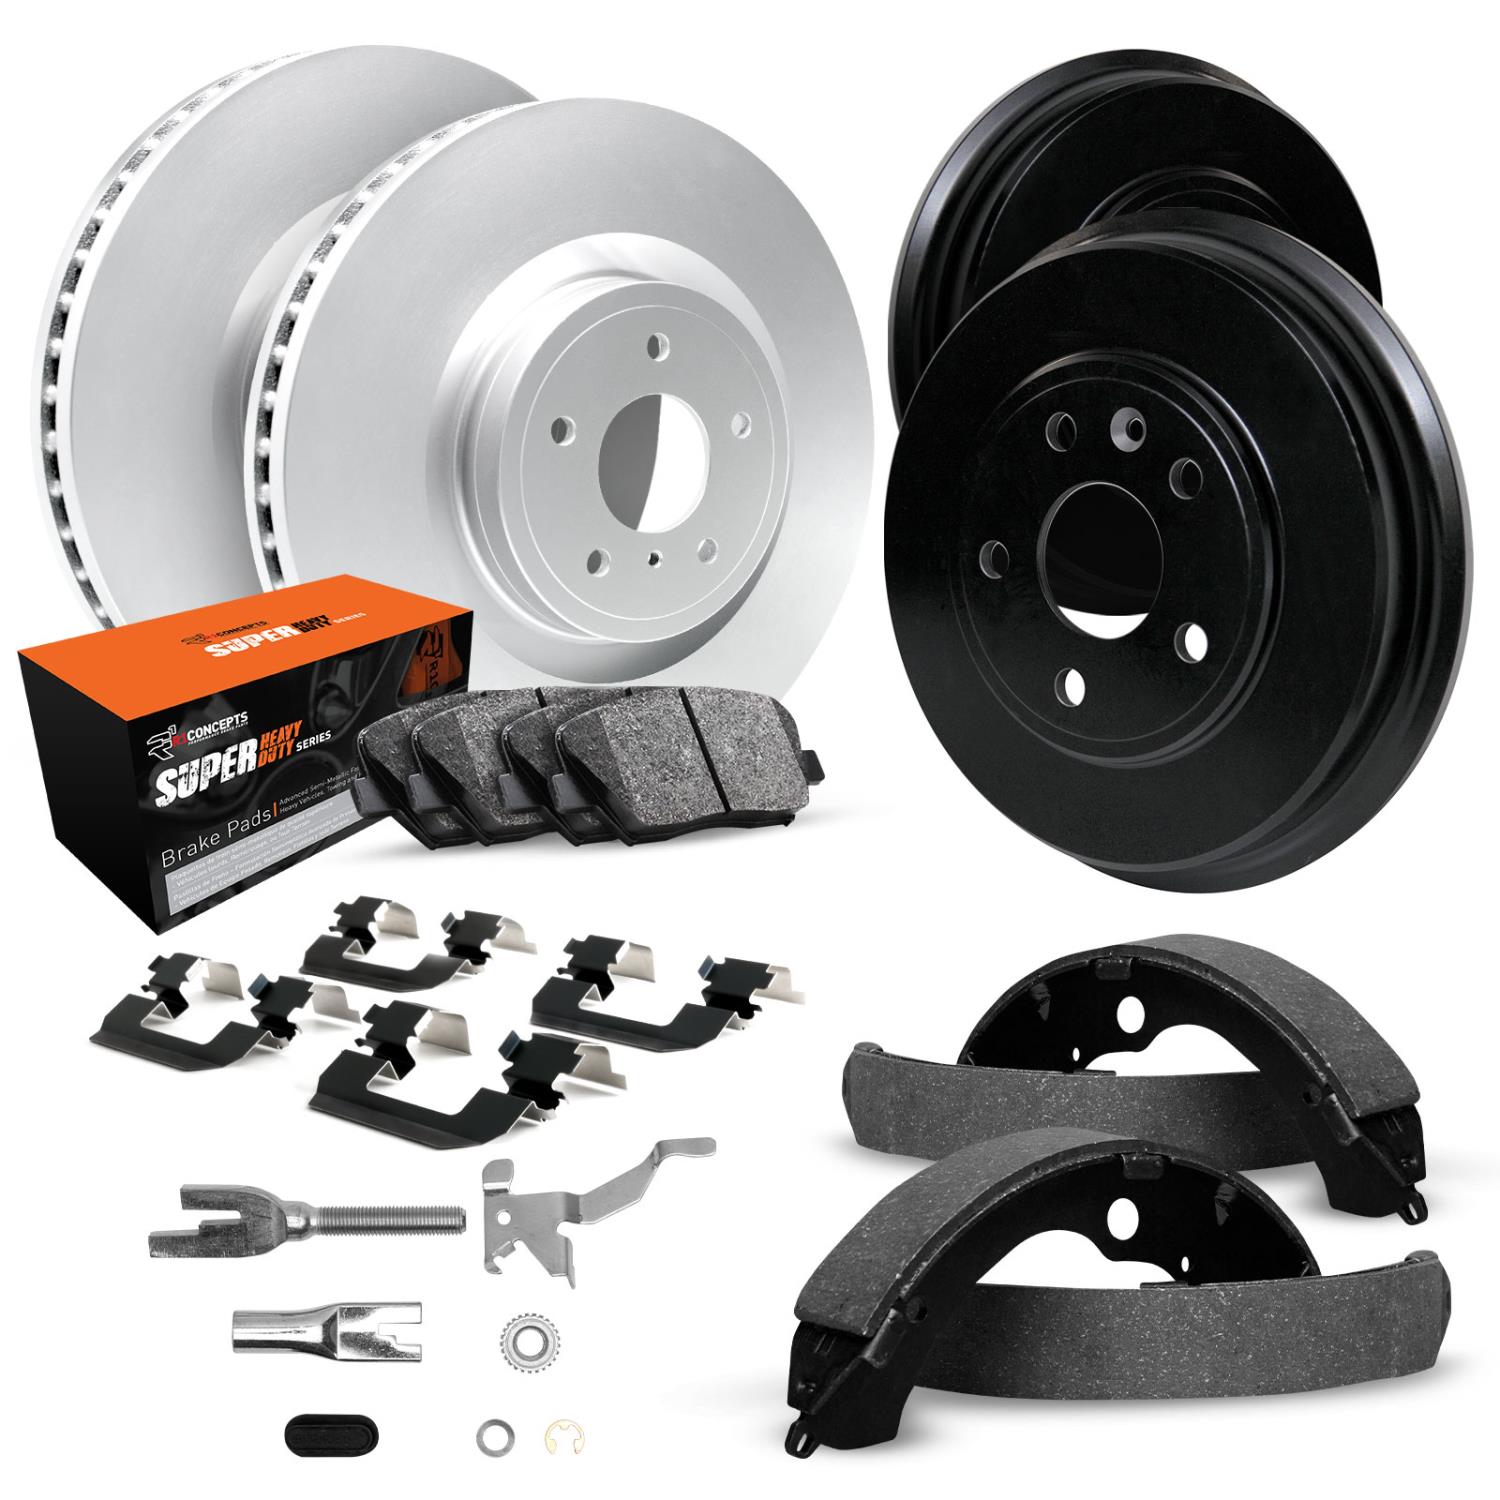 GEO-Carbon Brake Rotor & Drum Set w/Super-Duty Pads, Shoes, Hardware/Adjusters, 1998-2002 Ford/Lincoln/Mercury/Mazda